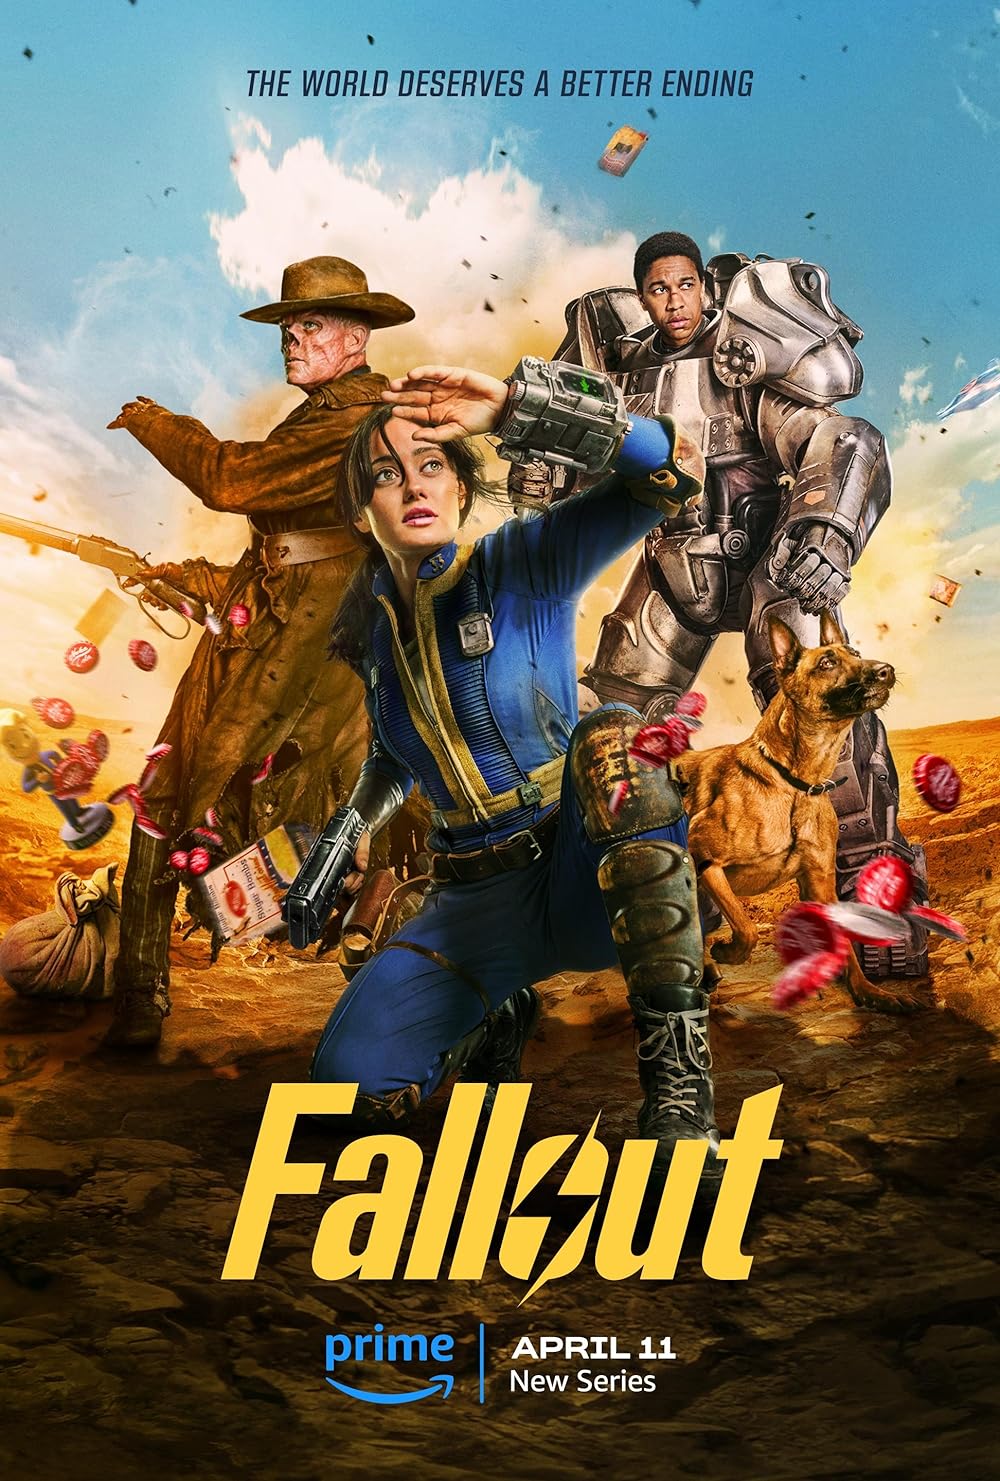 “Fallout” – A post-apocalyptic blast of a good time!